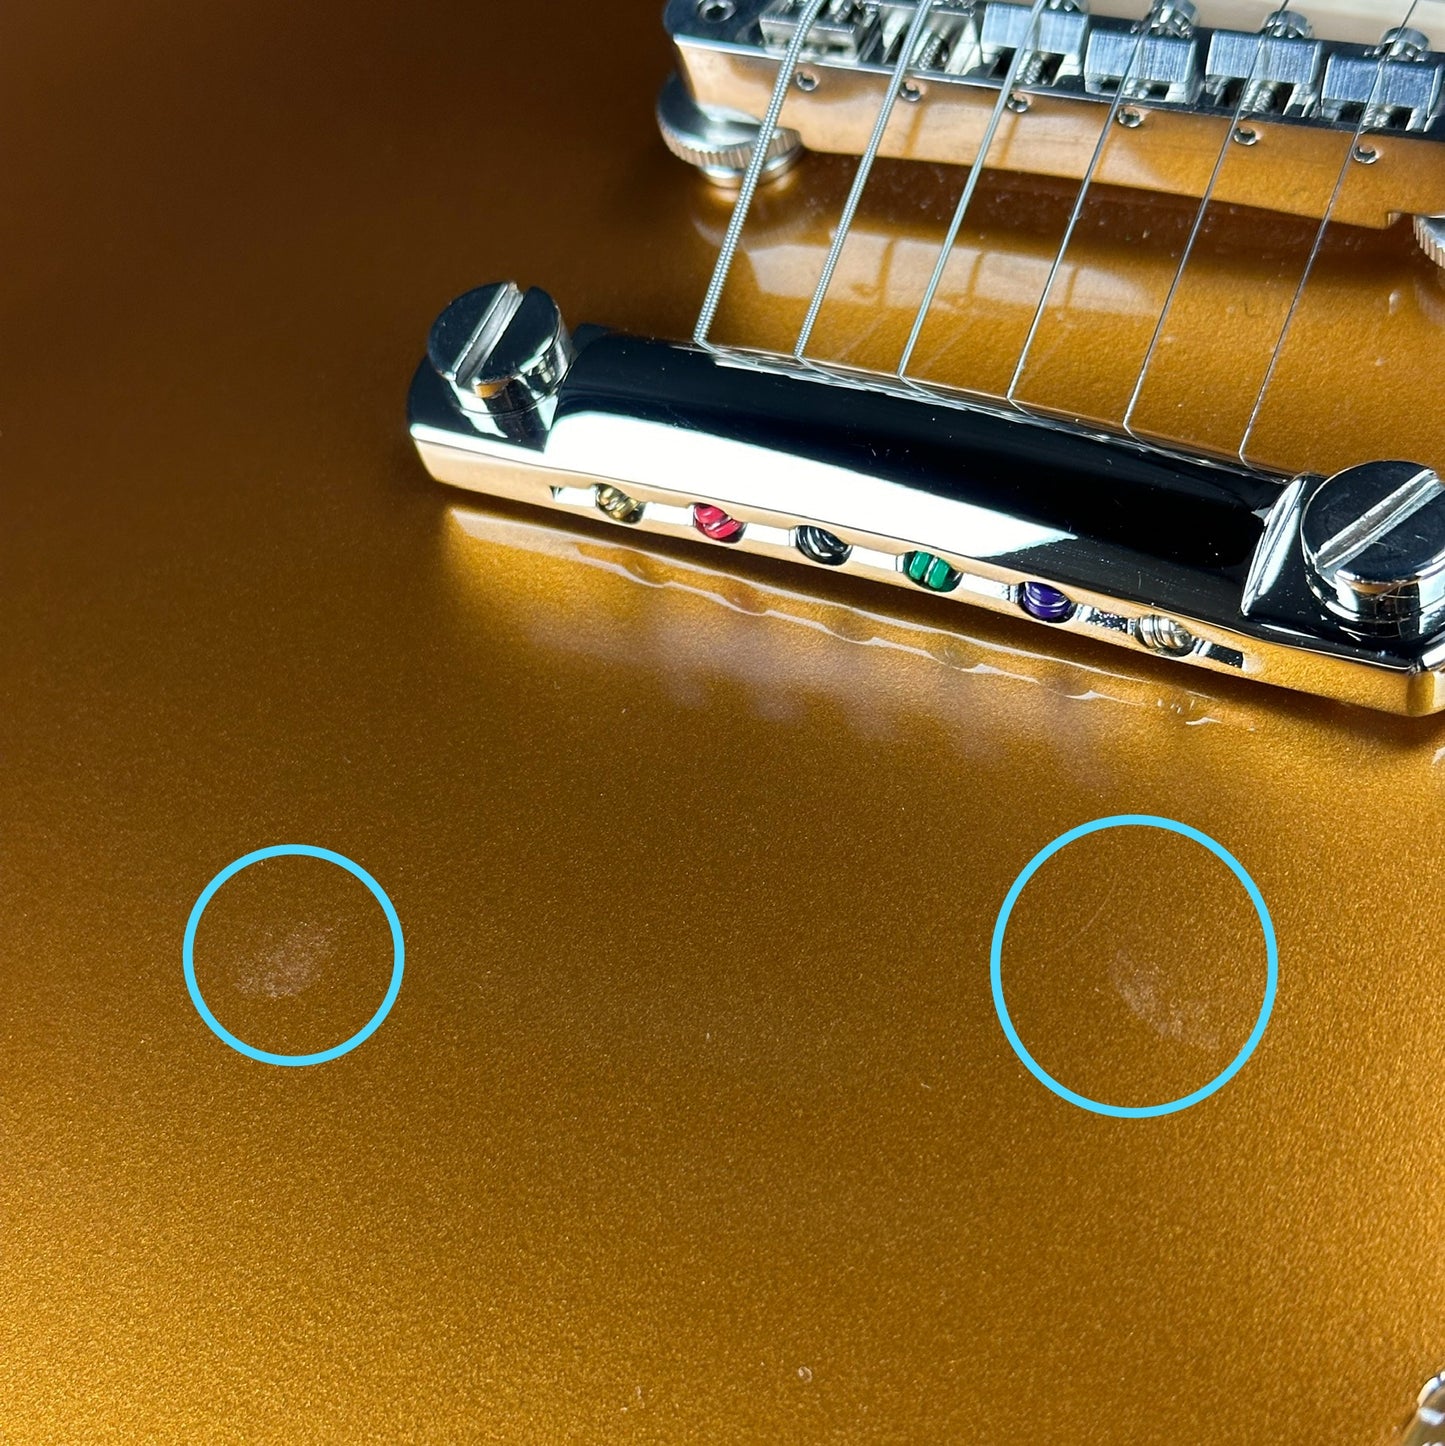 Two blemishes near bridge of Used 2020 Gibson Les Paul Standard 50's Goldtop.